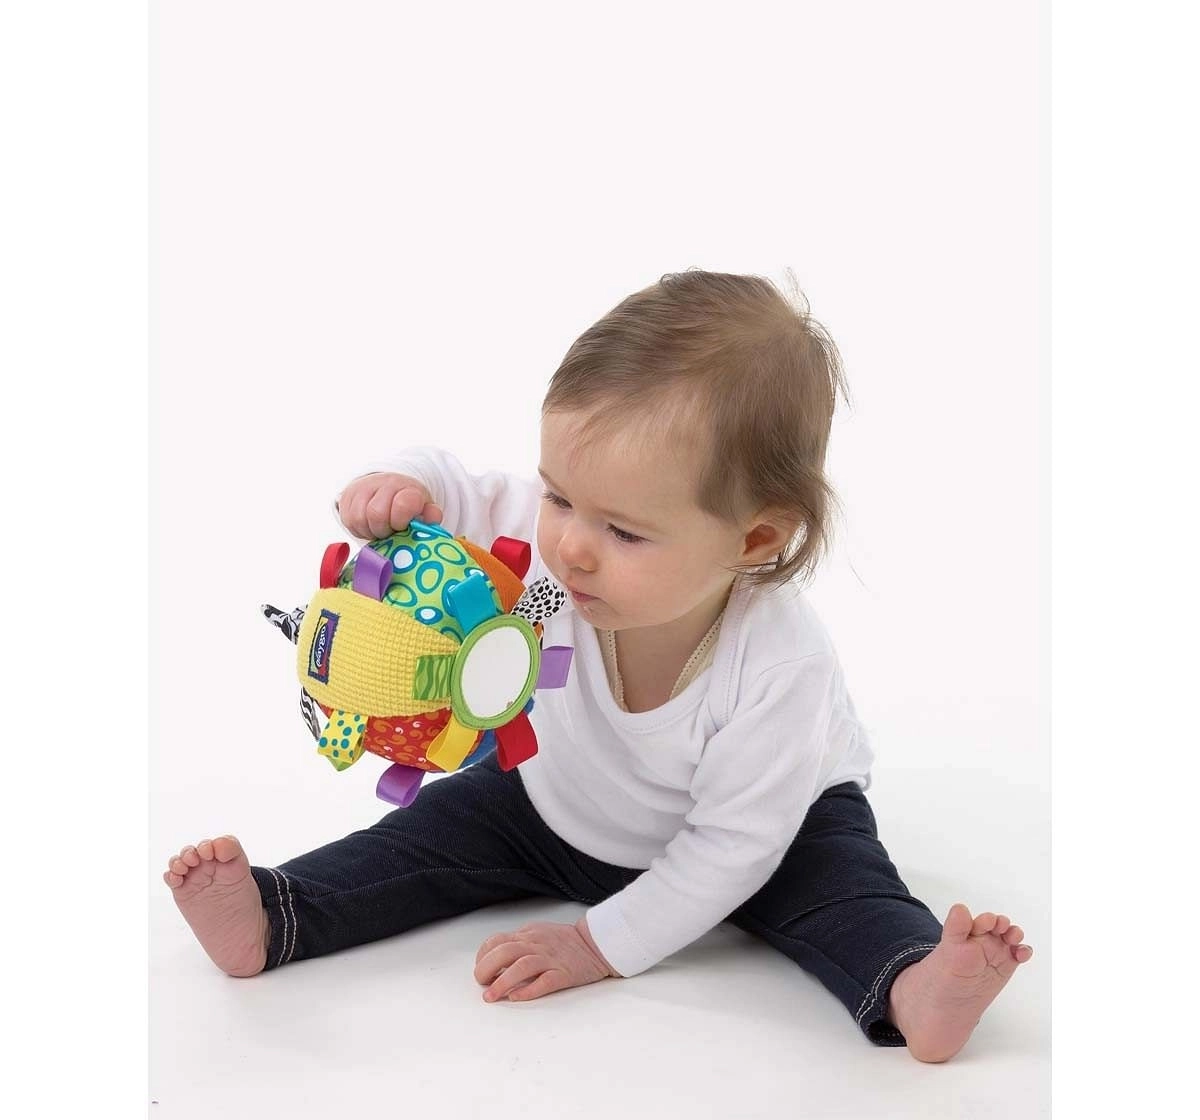 Playgro Loopy Loops Ball New Born for Kids age 3M+ 